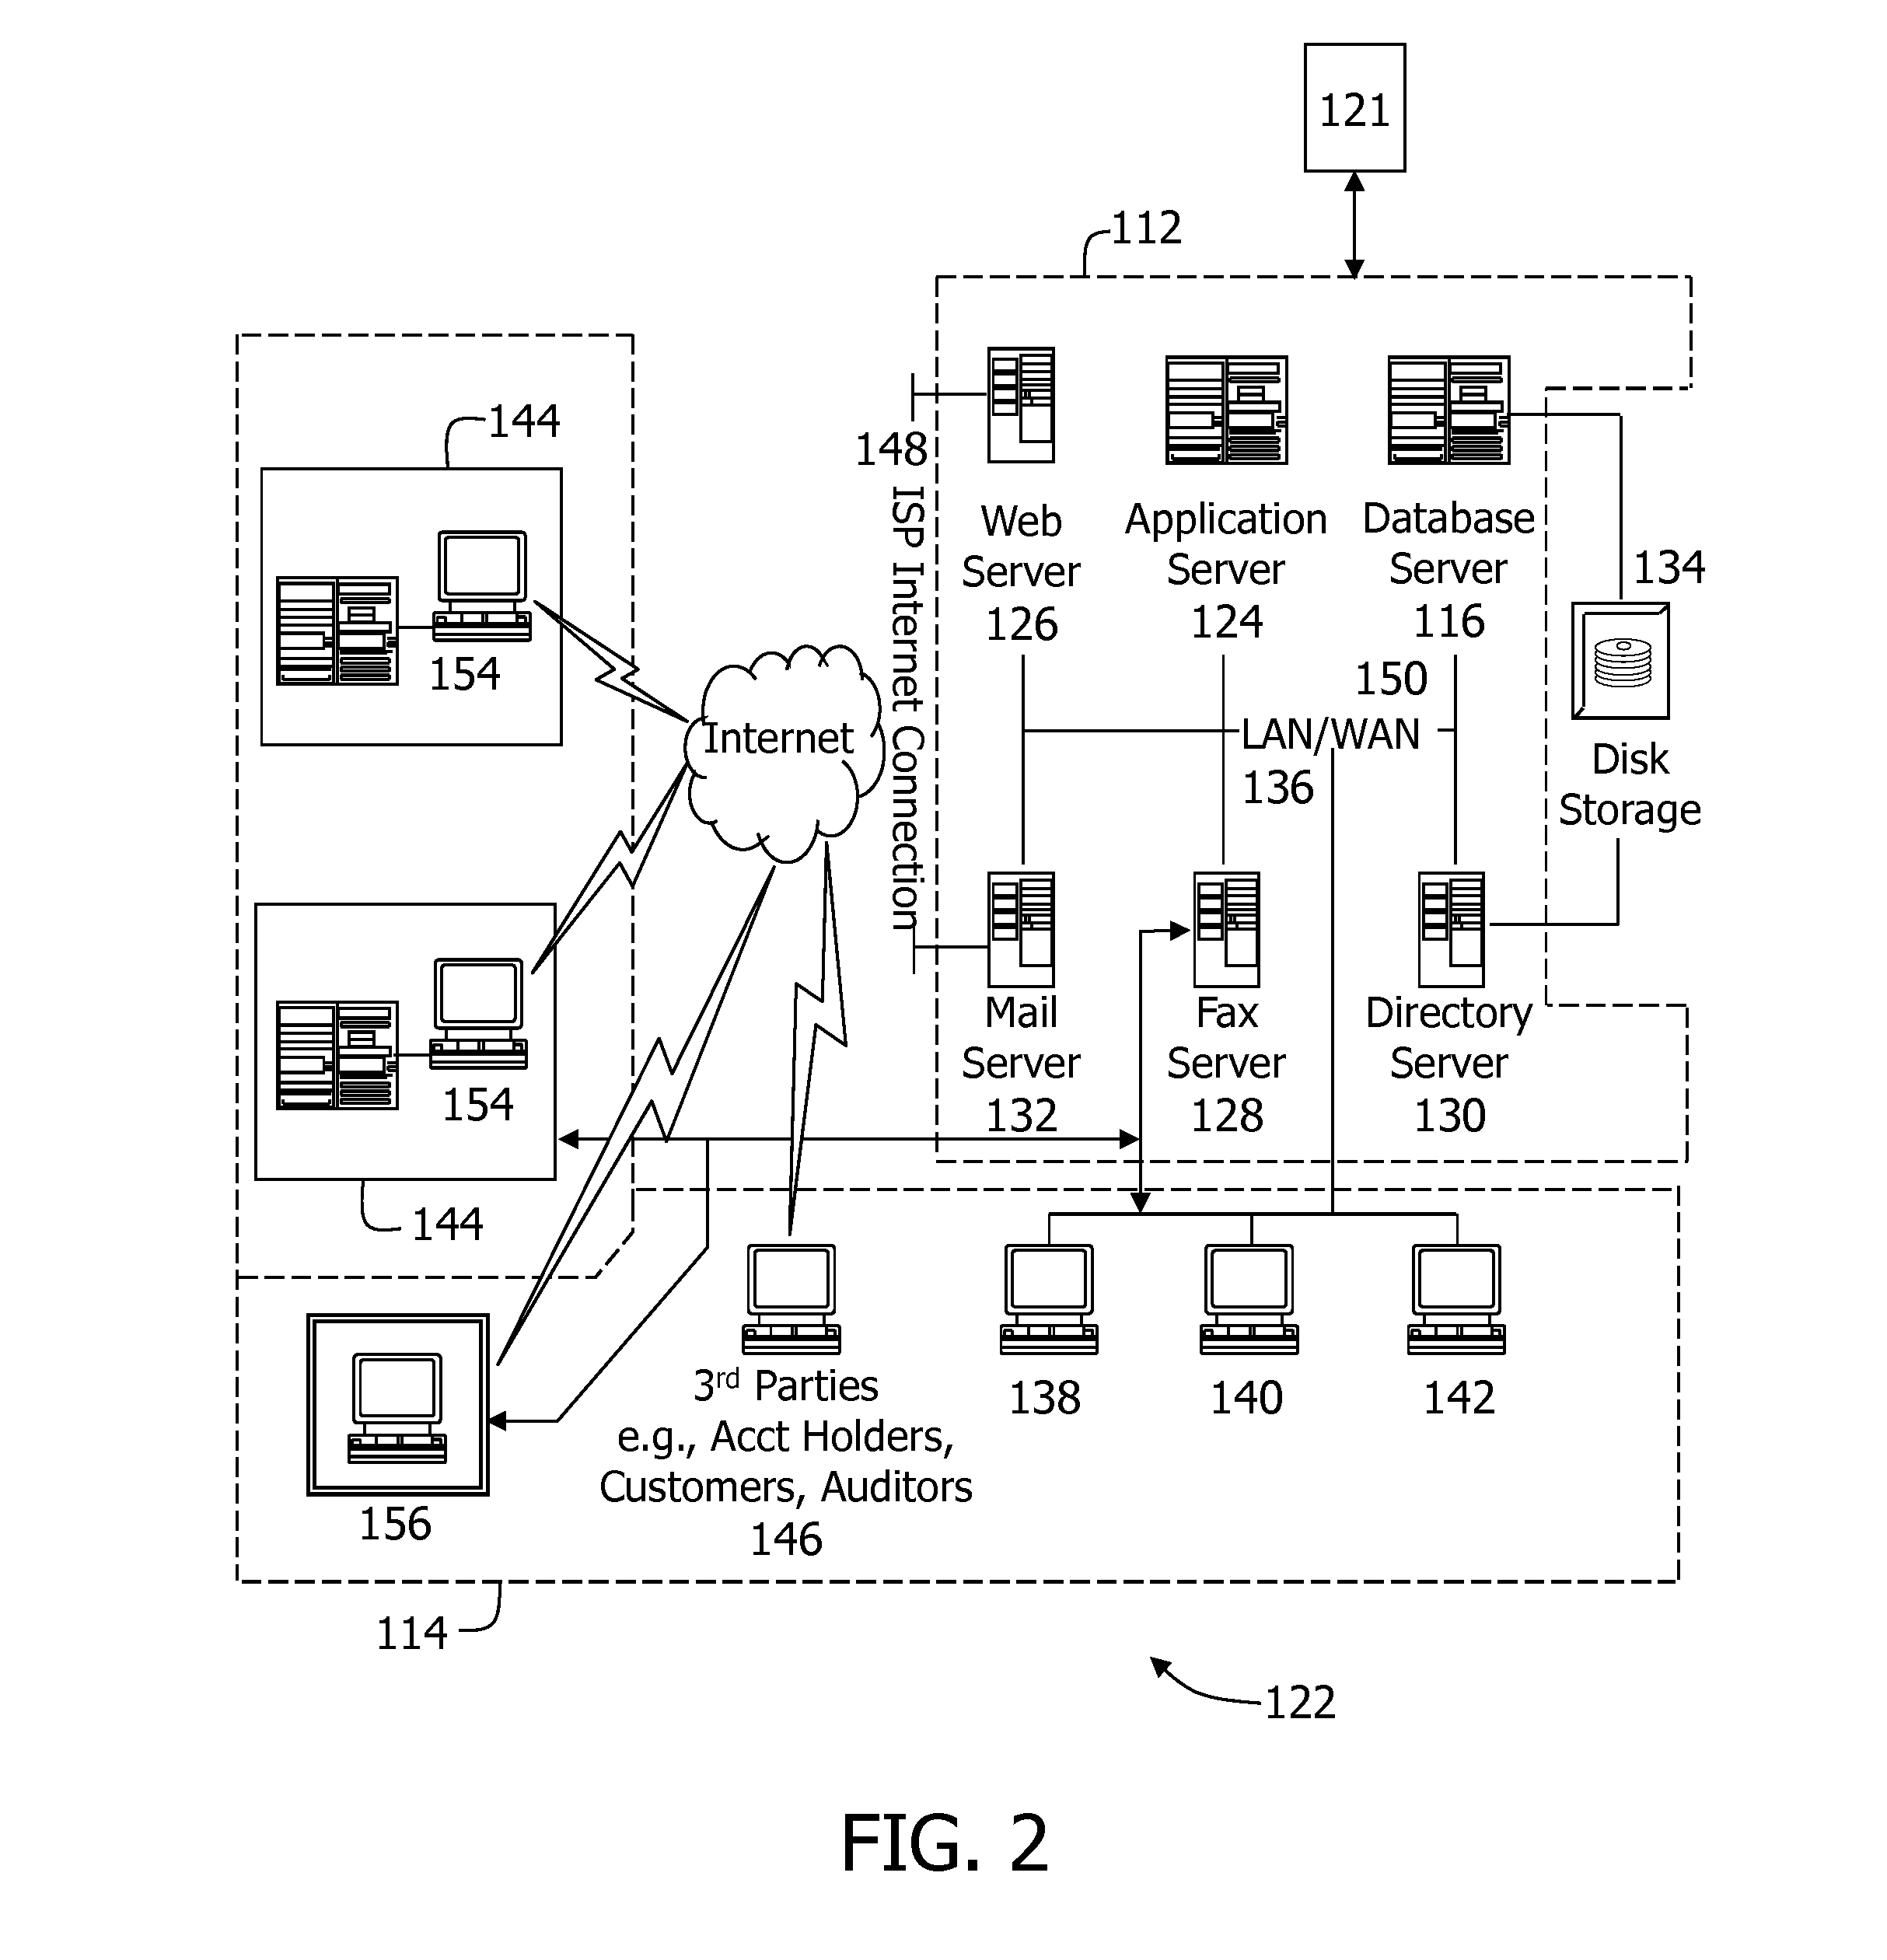 Methods and systems for evaluating technology assets using data sets to generate evaluation outputs